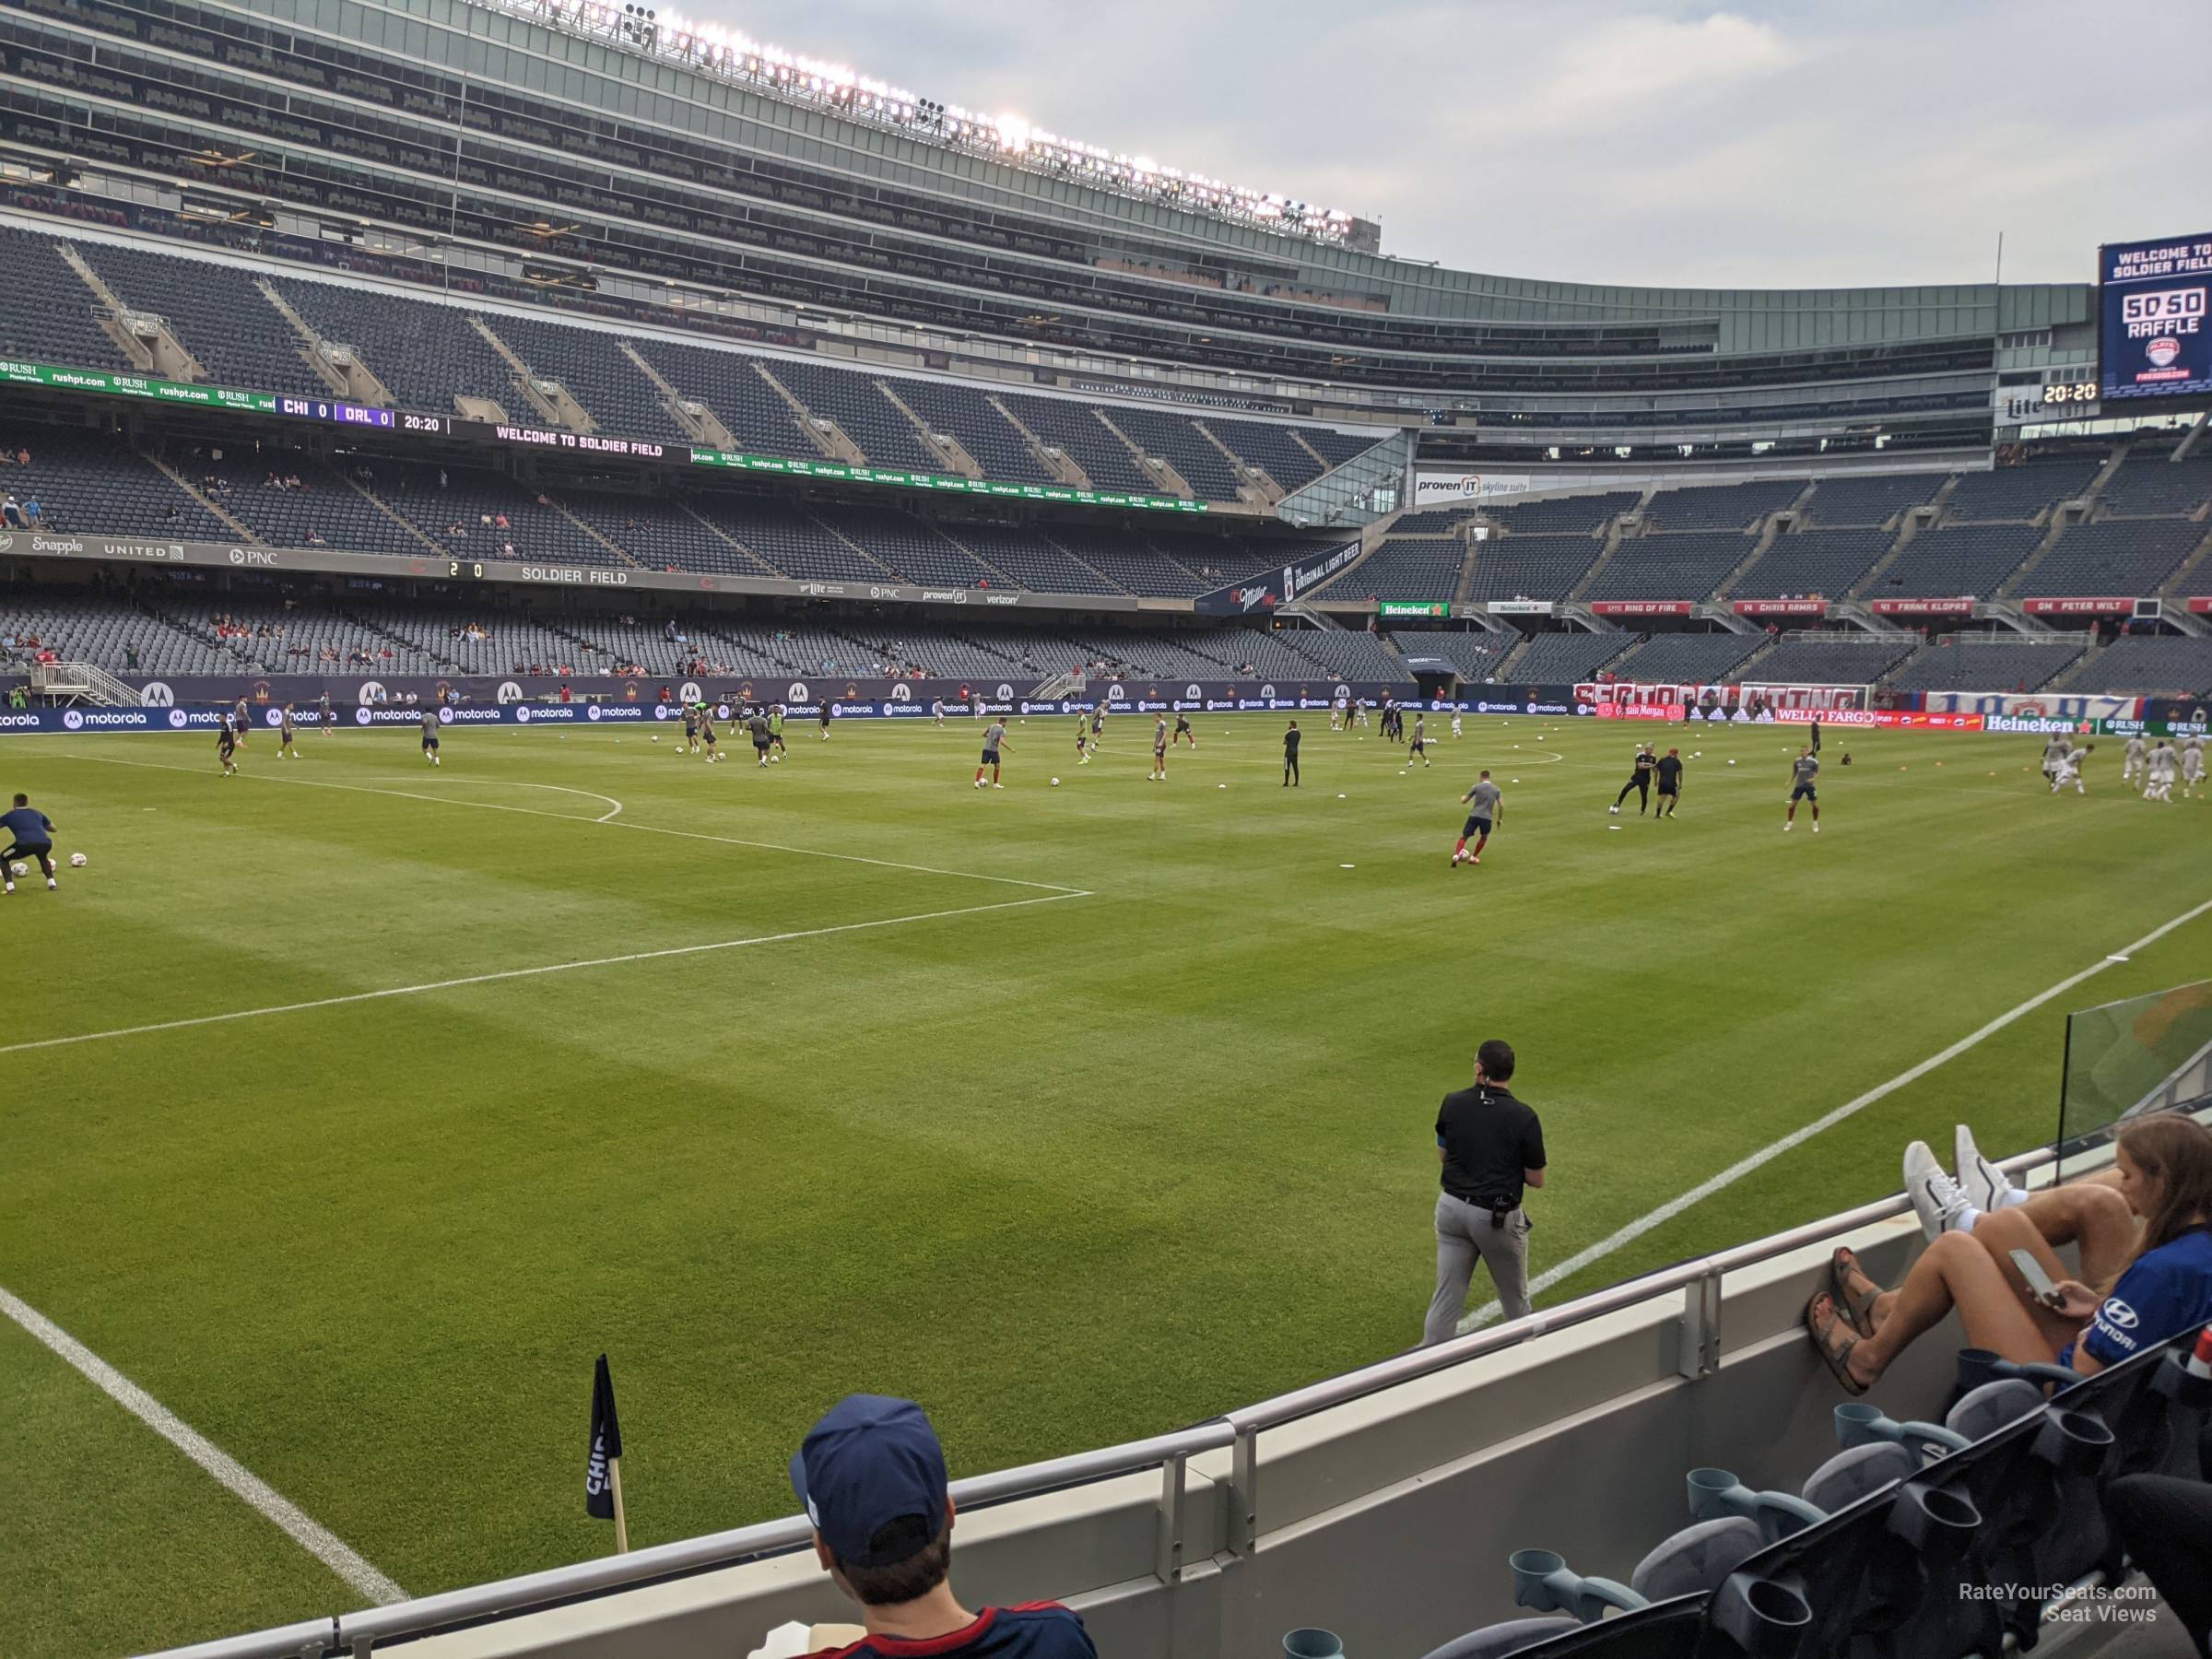 section 144, row 4 seat view  for soccer - soldier field